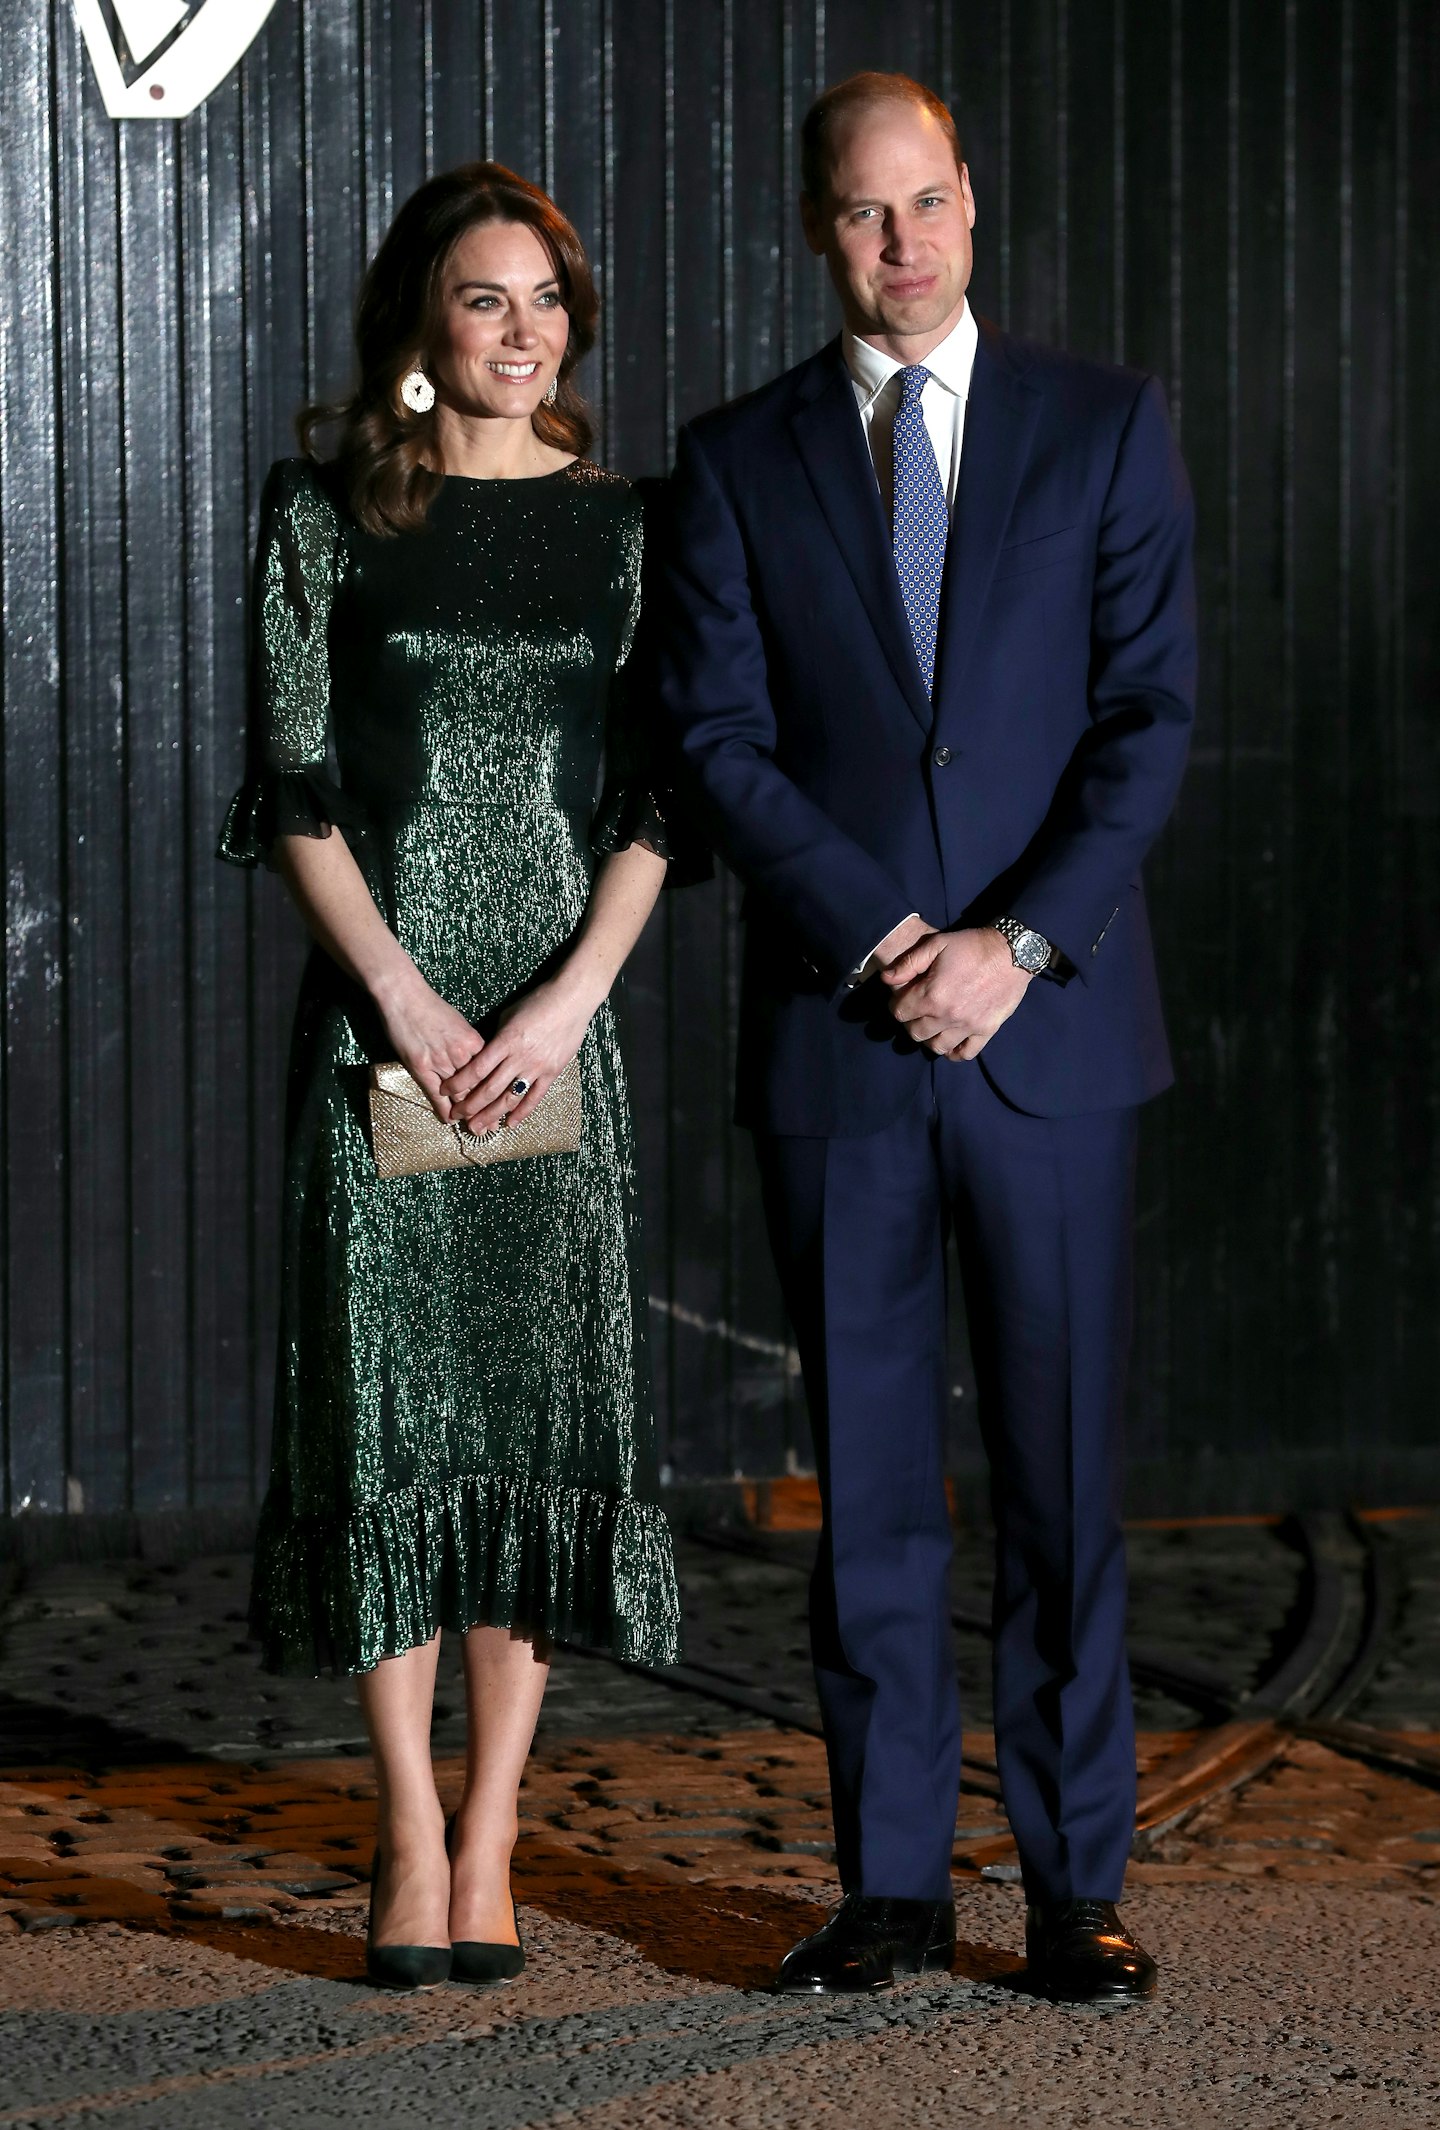 Our favourite Kate Middleton outfits